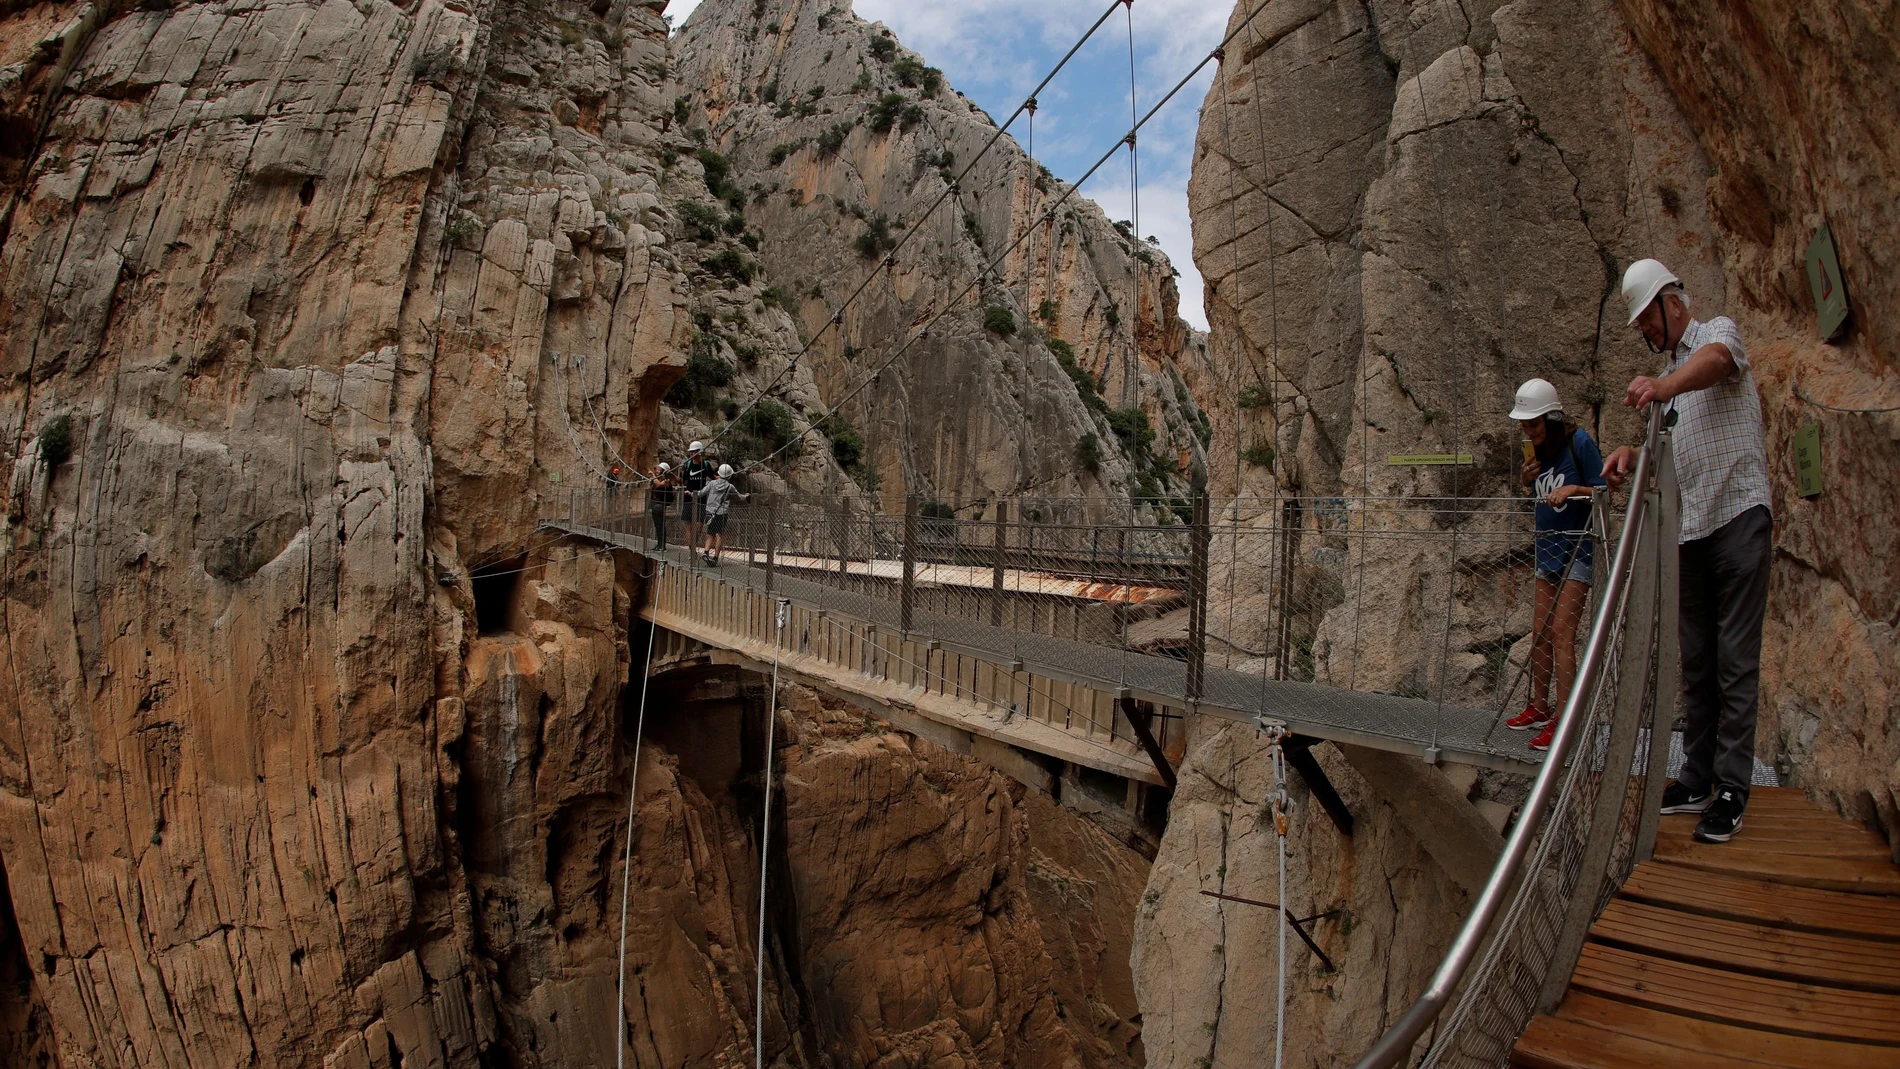 Visitors walk along the Caminito del Rey (The King's Little Pathway) in Ardales-Alora